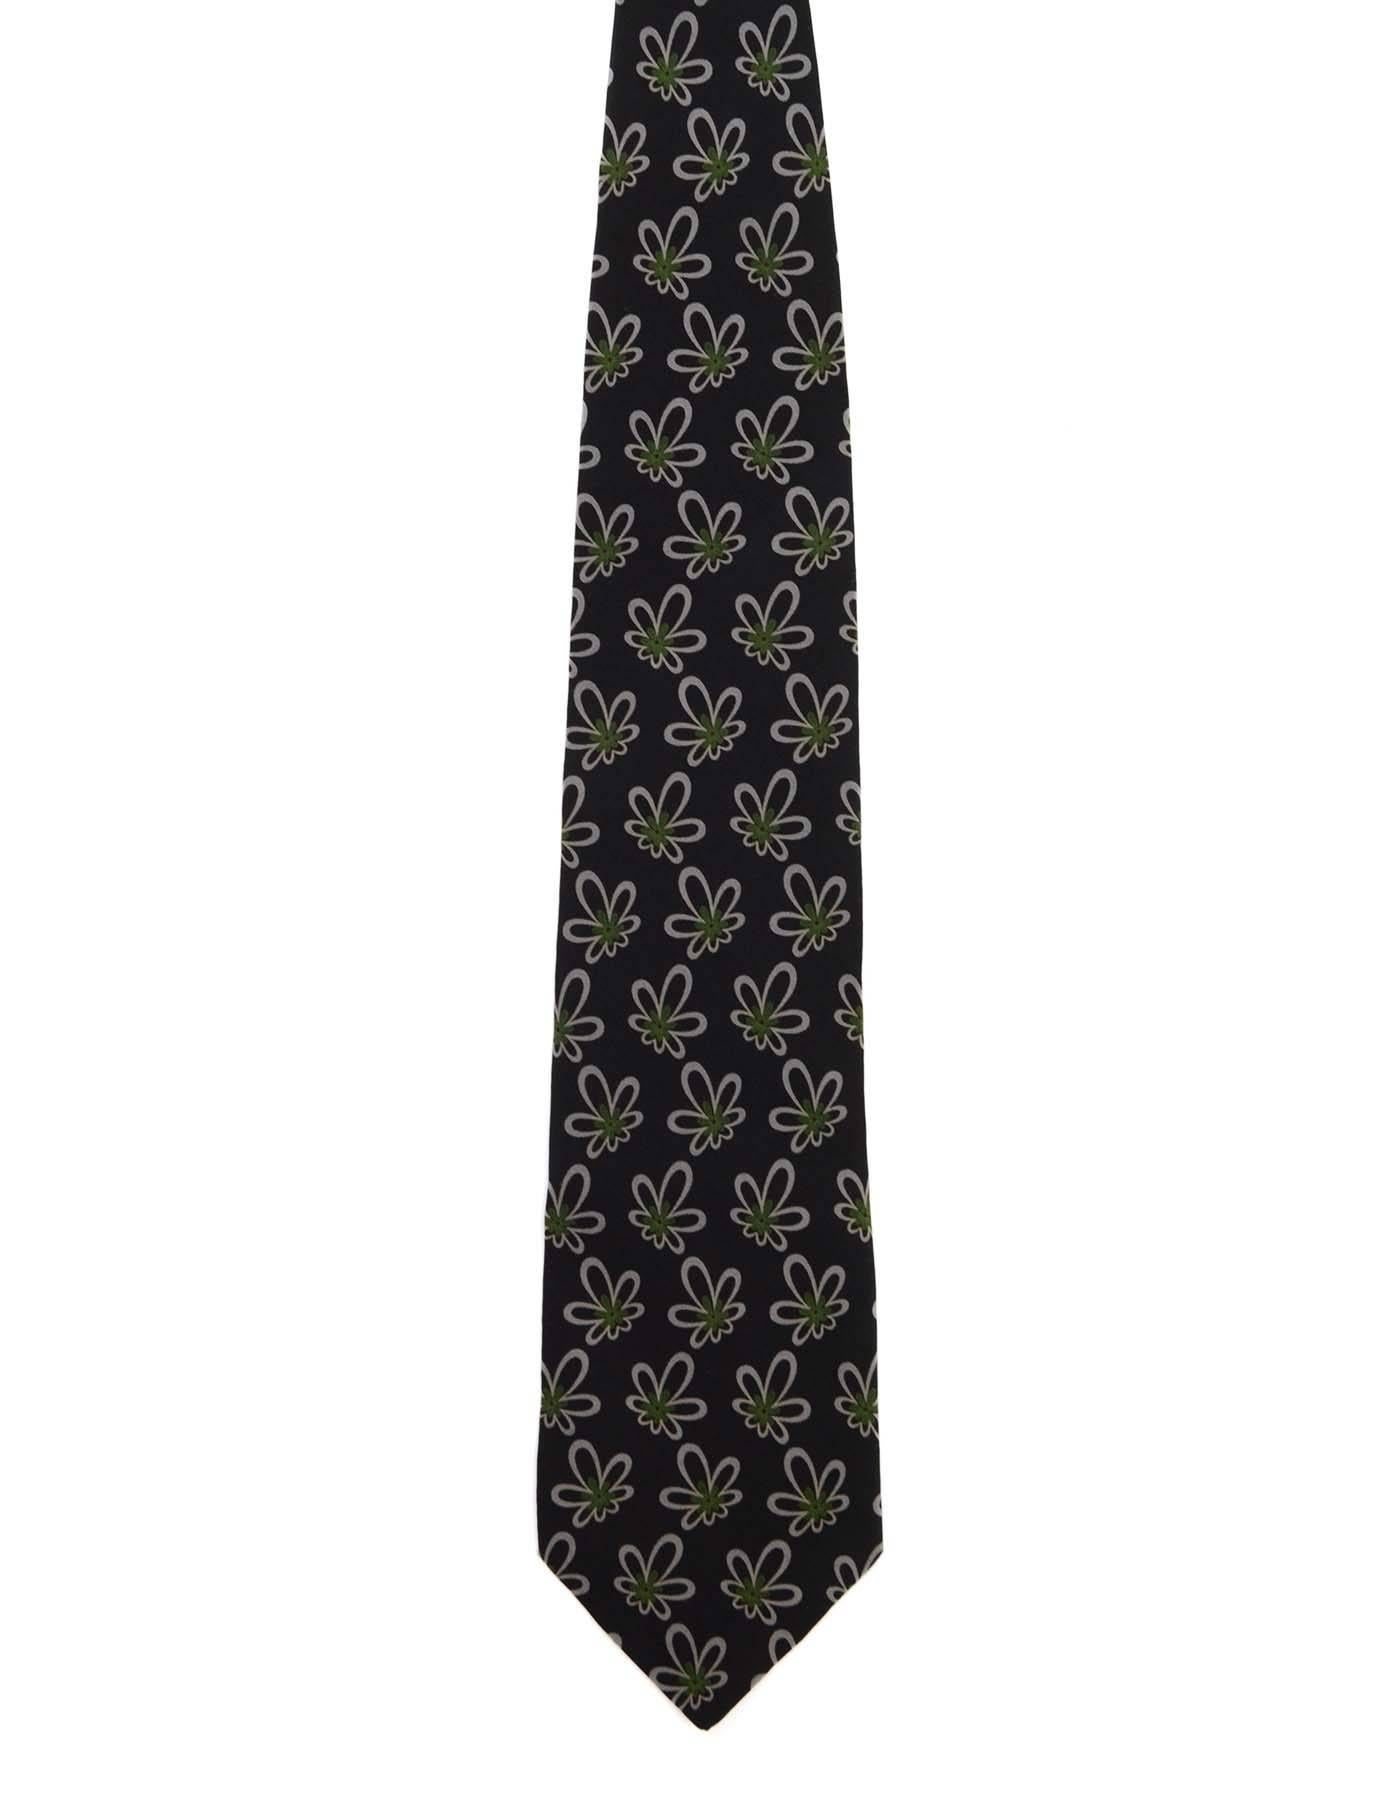 Giorgio Armani Navy Silk Floral Print Tie
Made In: Italy
Color: Navy, green and grey
Composition: 100% Silk
Overall Condition: Excellent pre-owned condition
Measurements: 
Length: 58